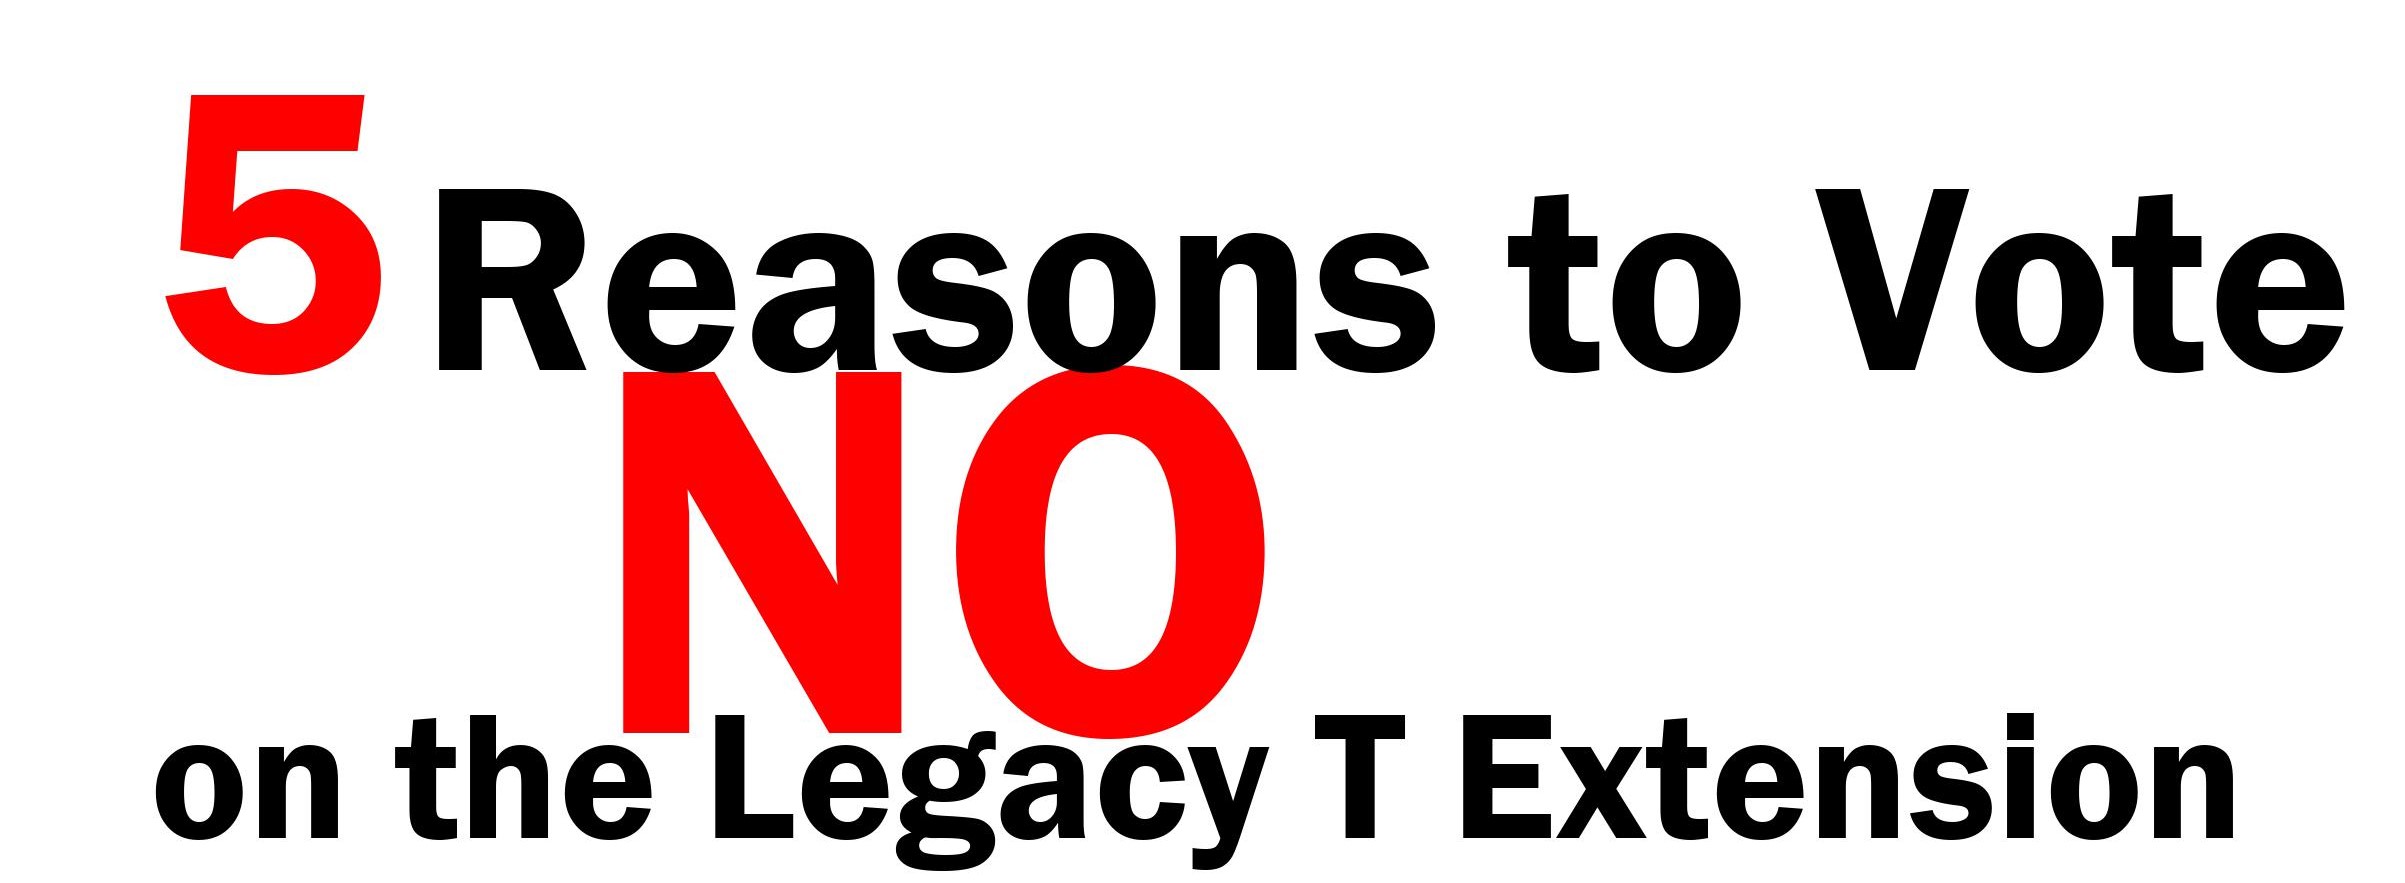 5 Reasons to Vote NO on Legacy T Extension